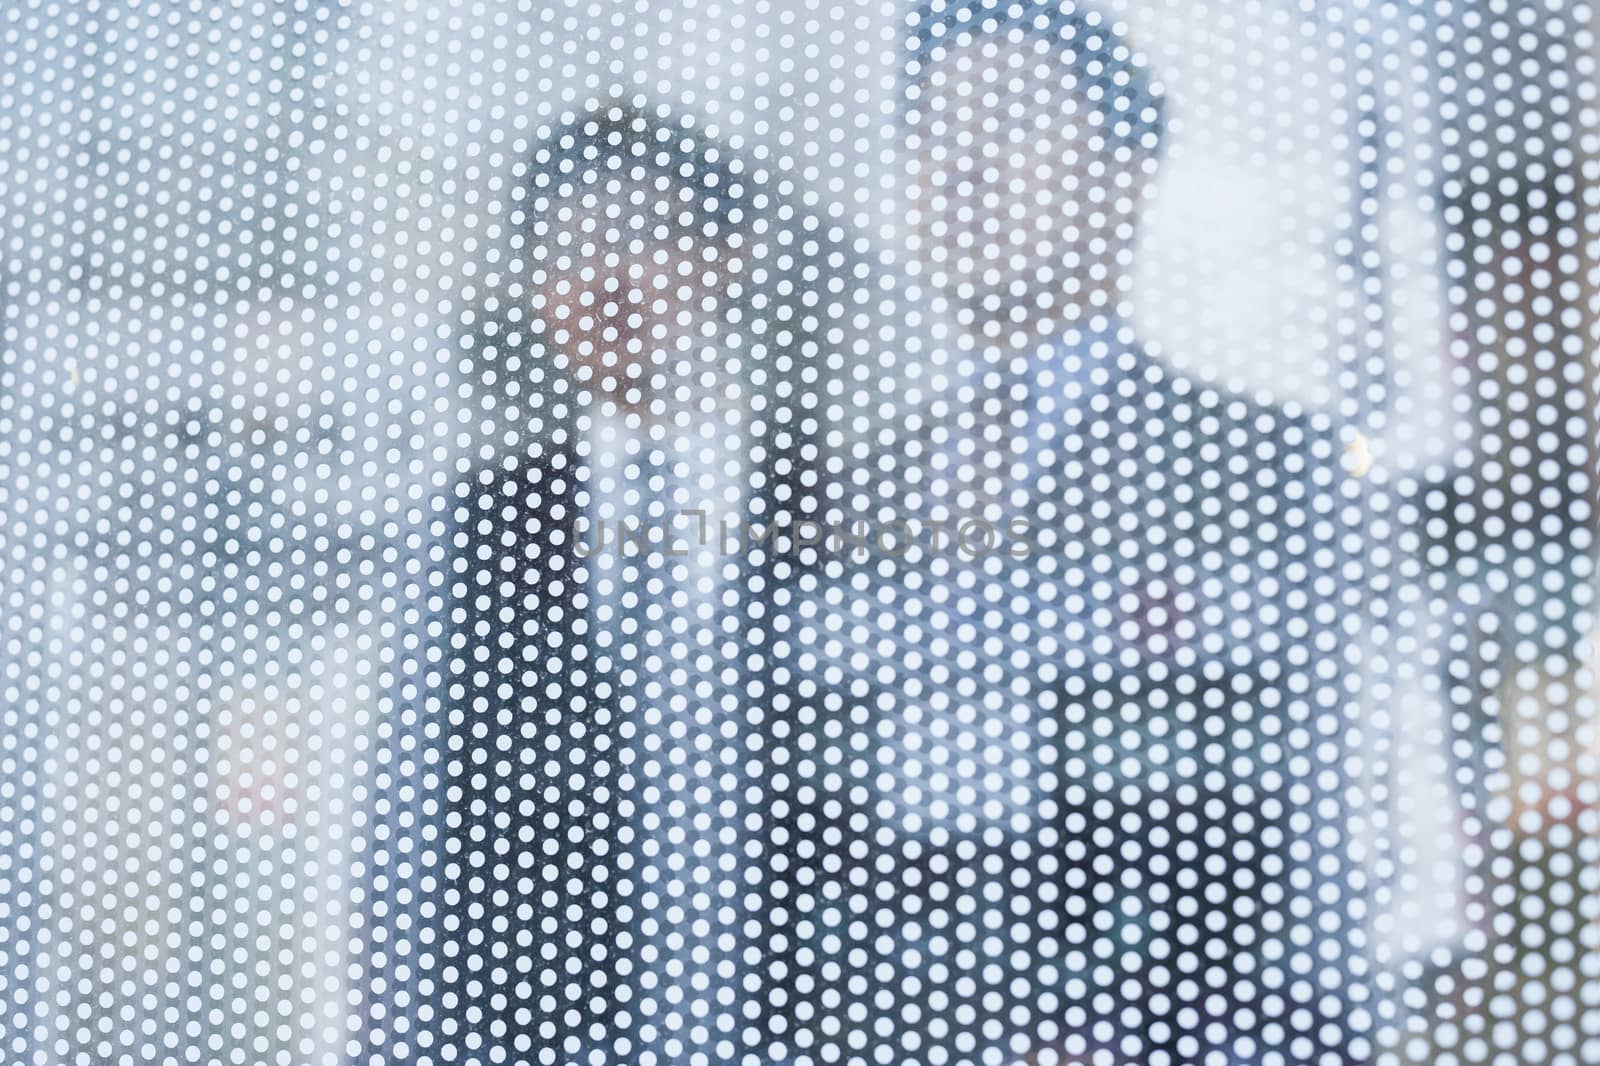 Two businessmen behind a glass wall looking out, unrecognizable faces